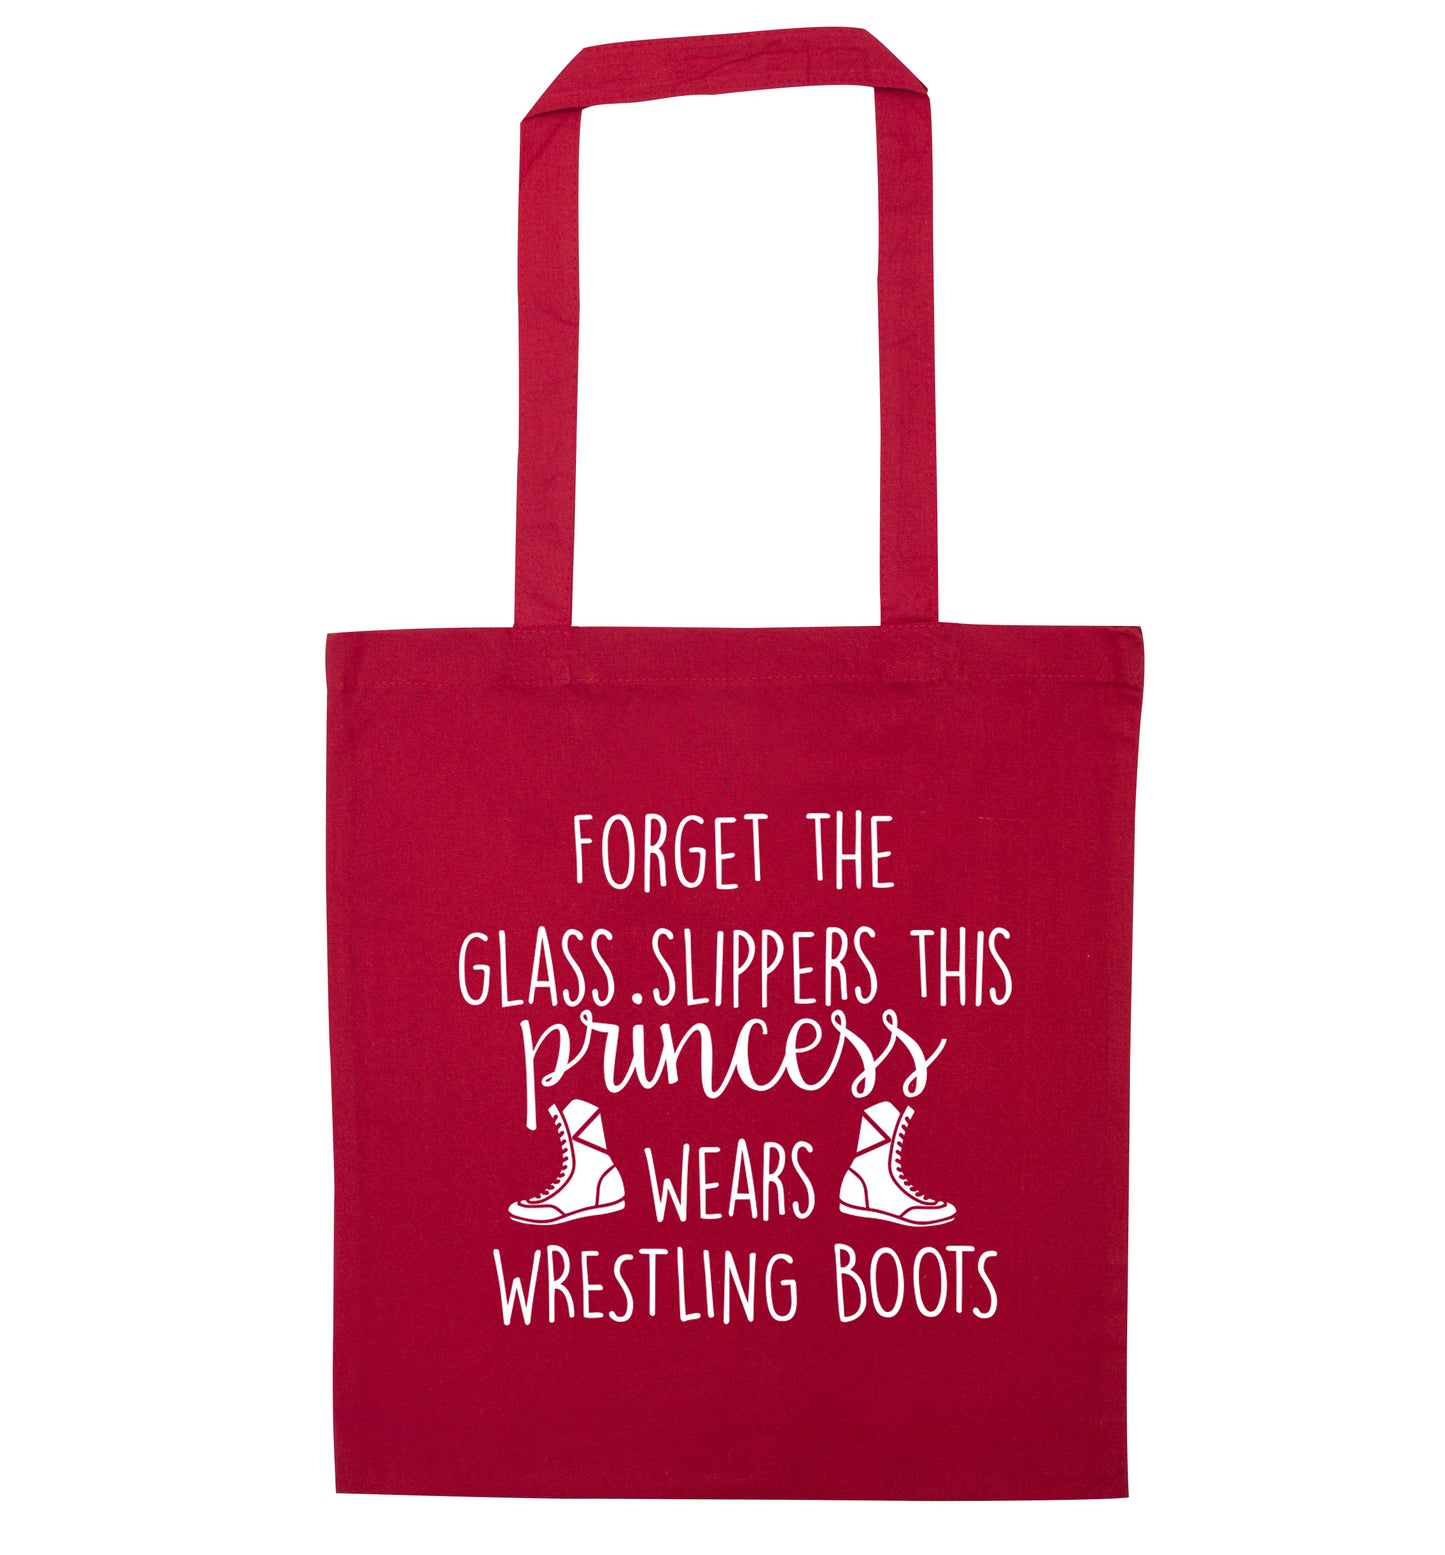 Forget the glass slippers this princess wears wrestling boots red tote bag